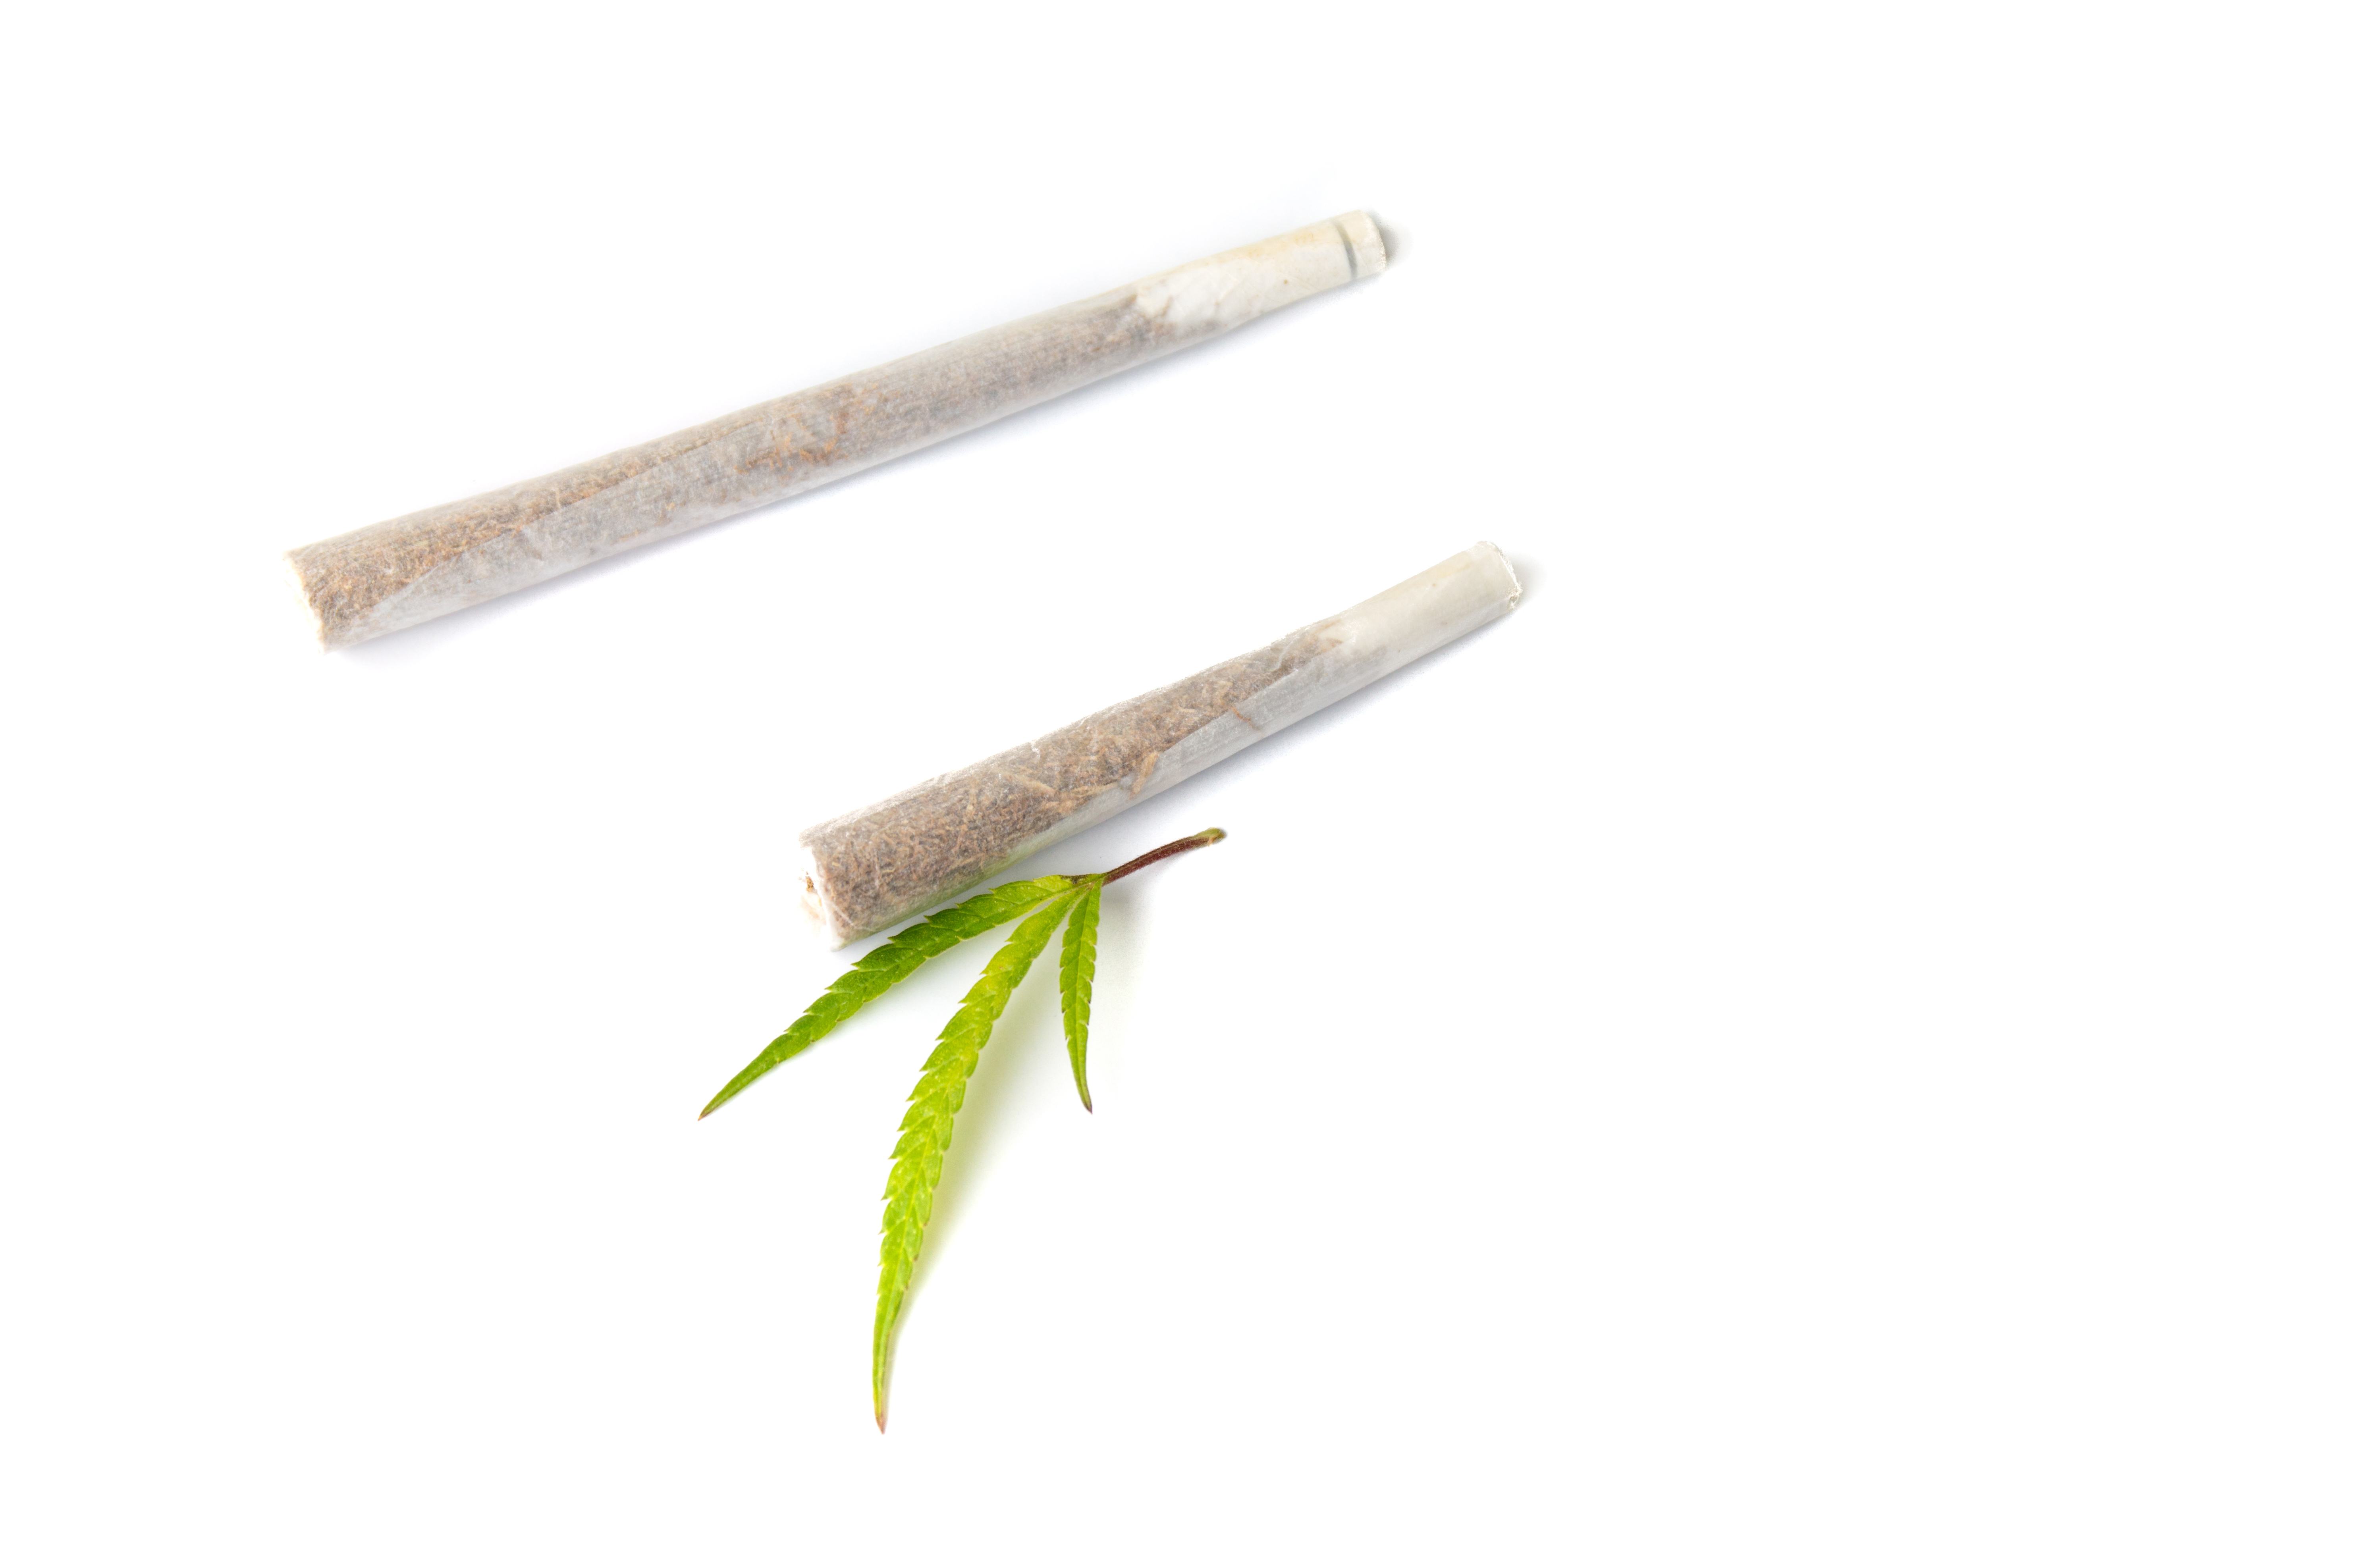 Two different sized marijuana prerolls and a small marijuana leaf lay on a white background.